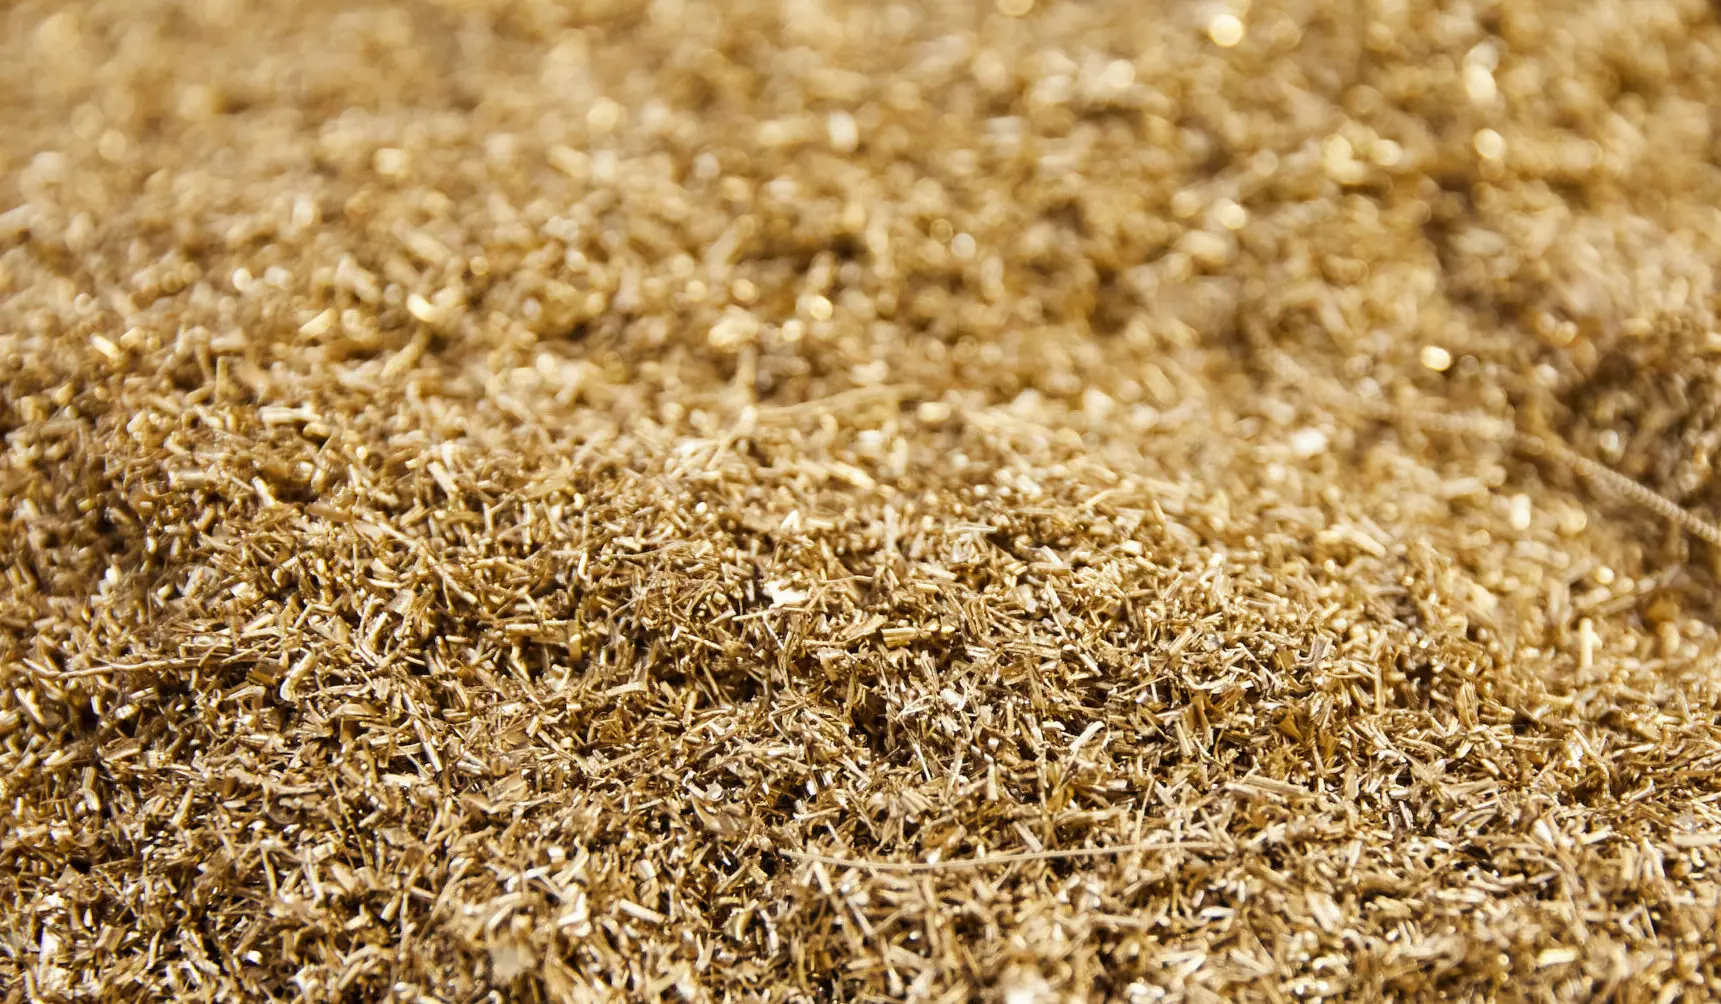 A close up of the ground that is made out of straw.